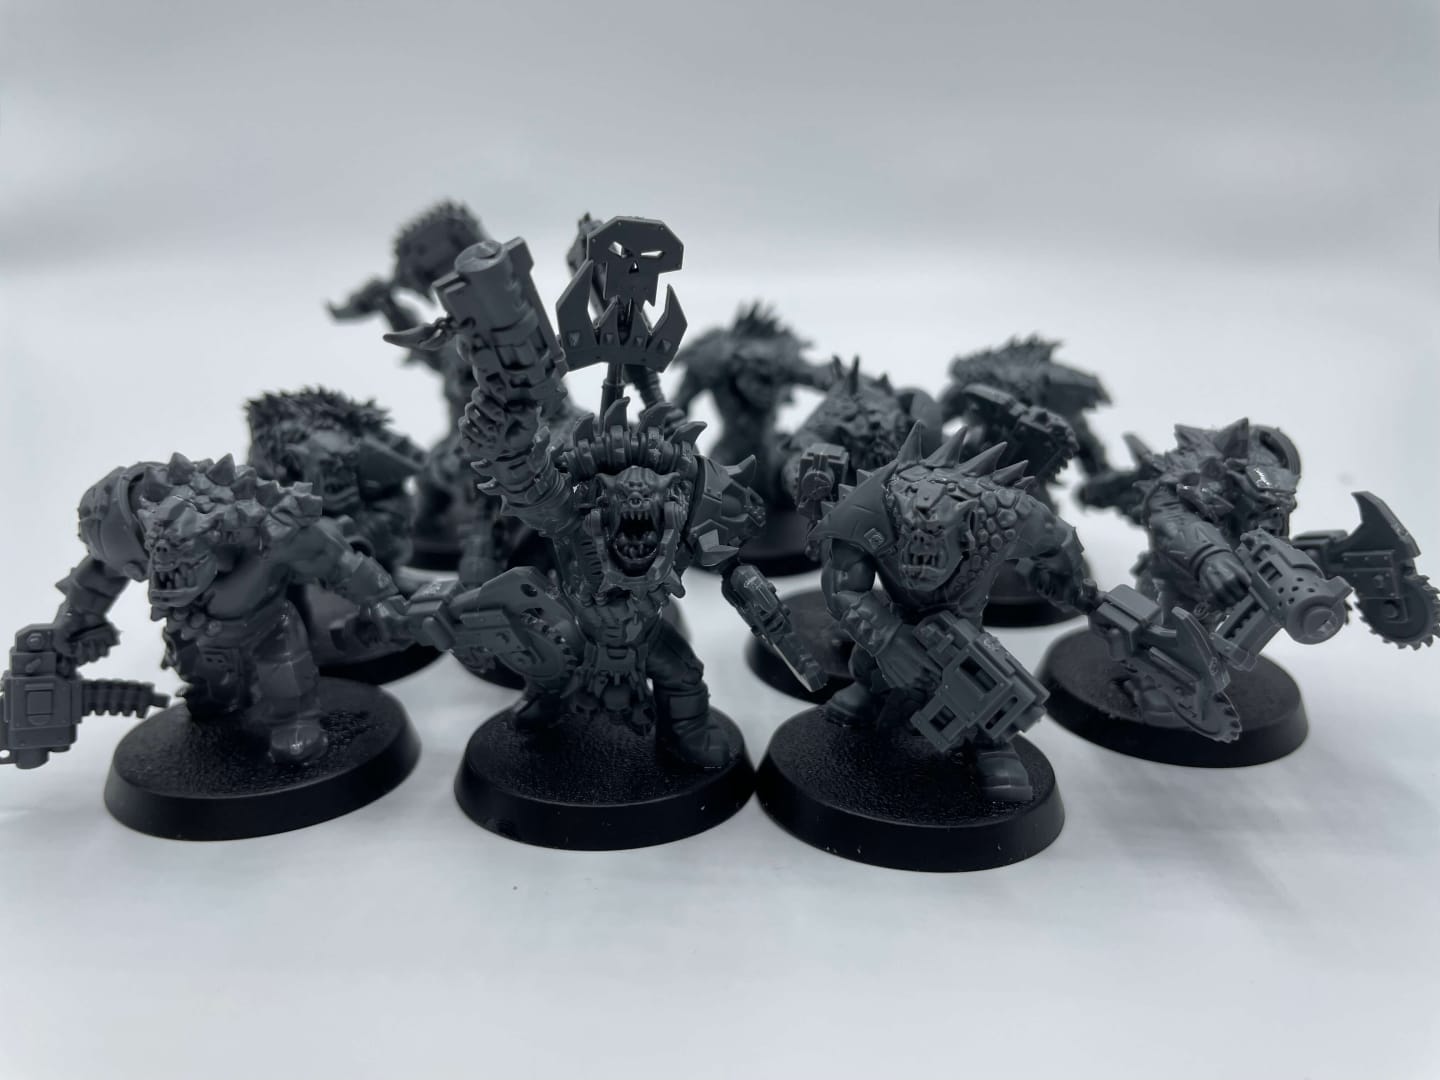 An image of the Warhammer 40K Boarding Patrol Orks Beast Snagga Boyz, savage looking orks with crude weapons